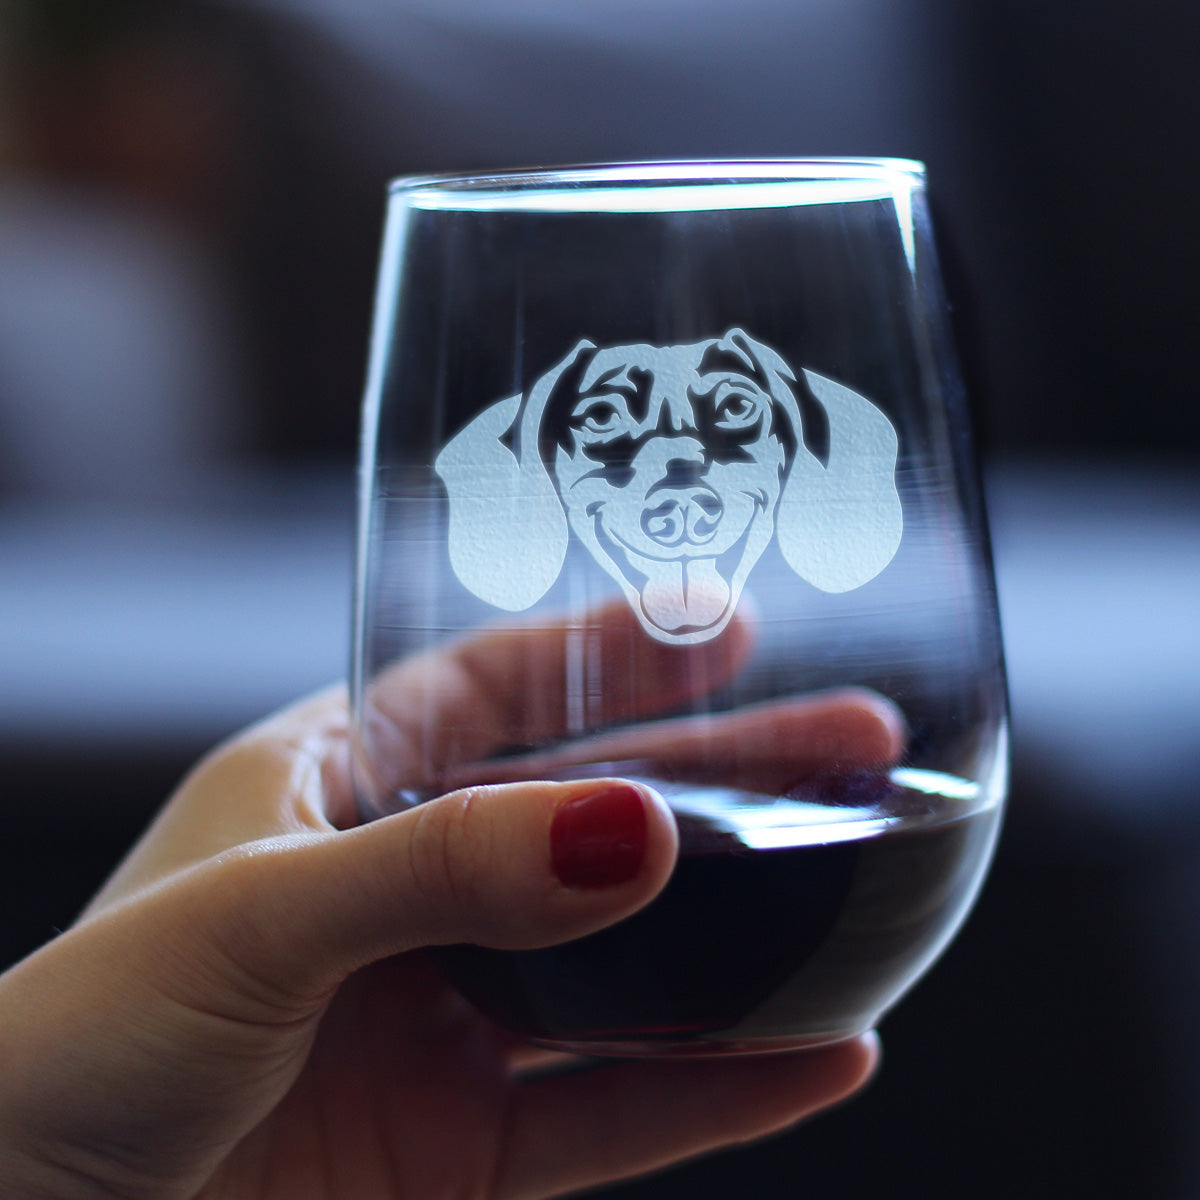 Dachshund Face Stemless Wine Glass - Cute Dog Themed Decor and Gifts for Moms &amp; Dads of Dachshunds - Large 17 Oz